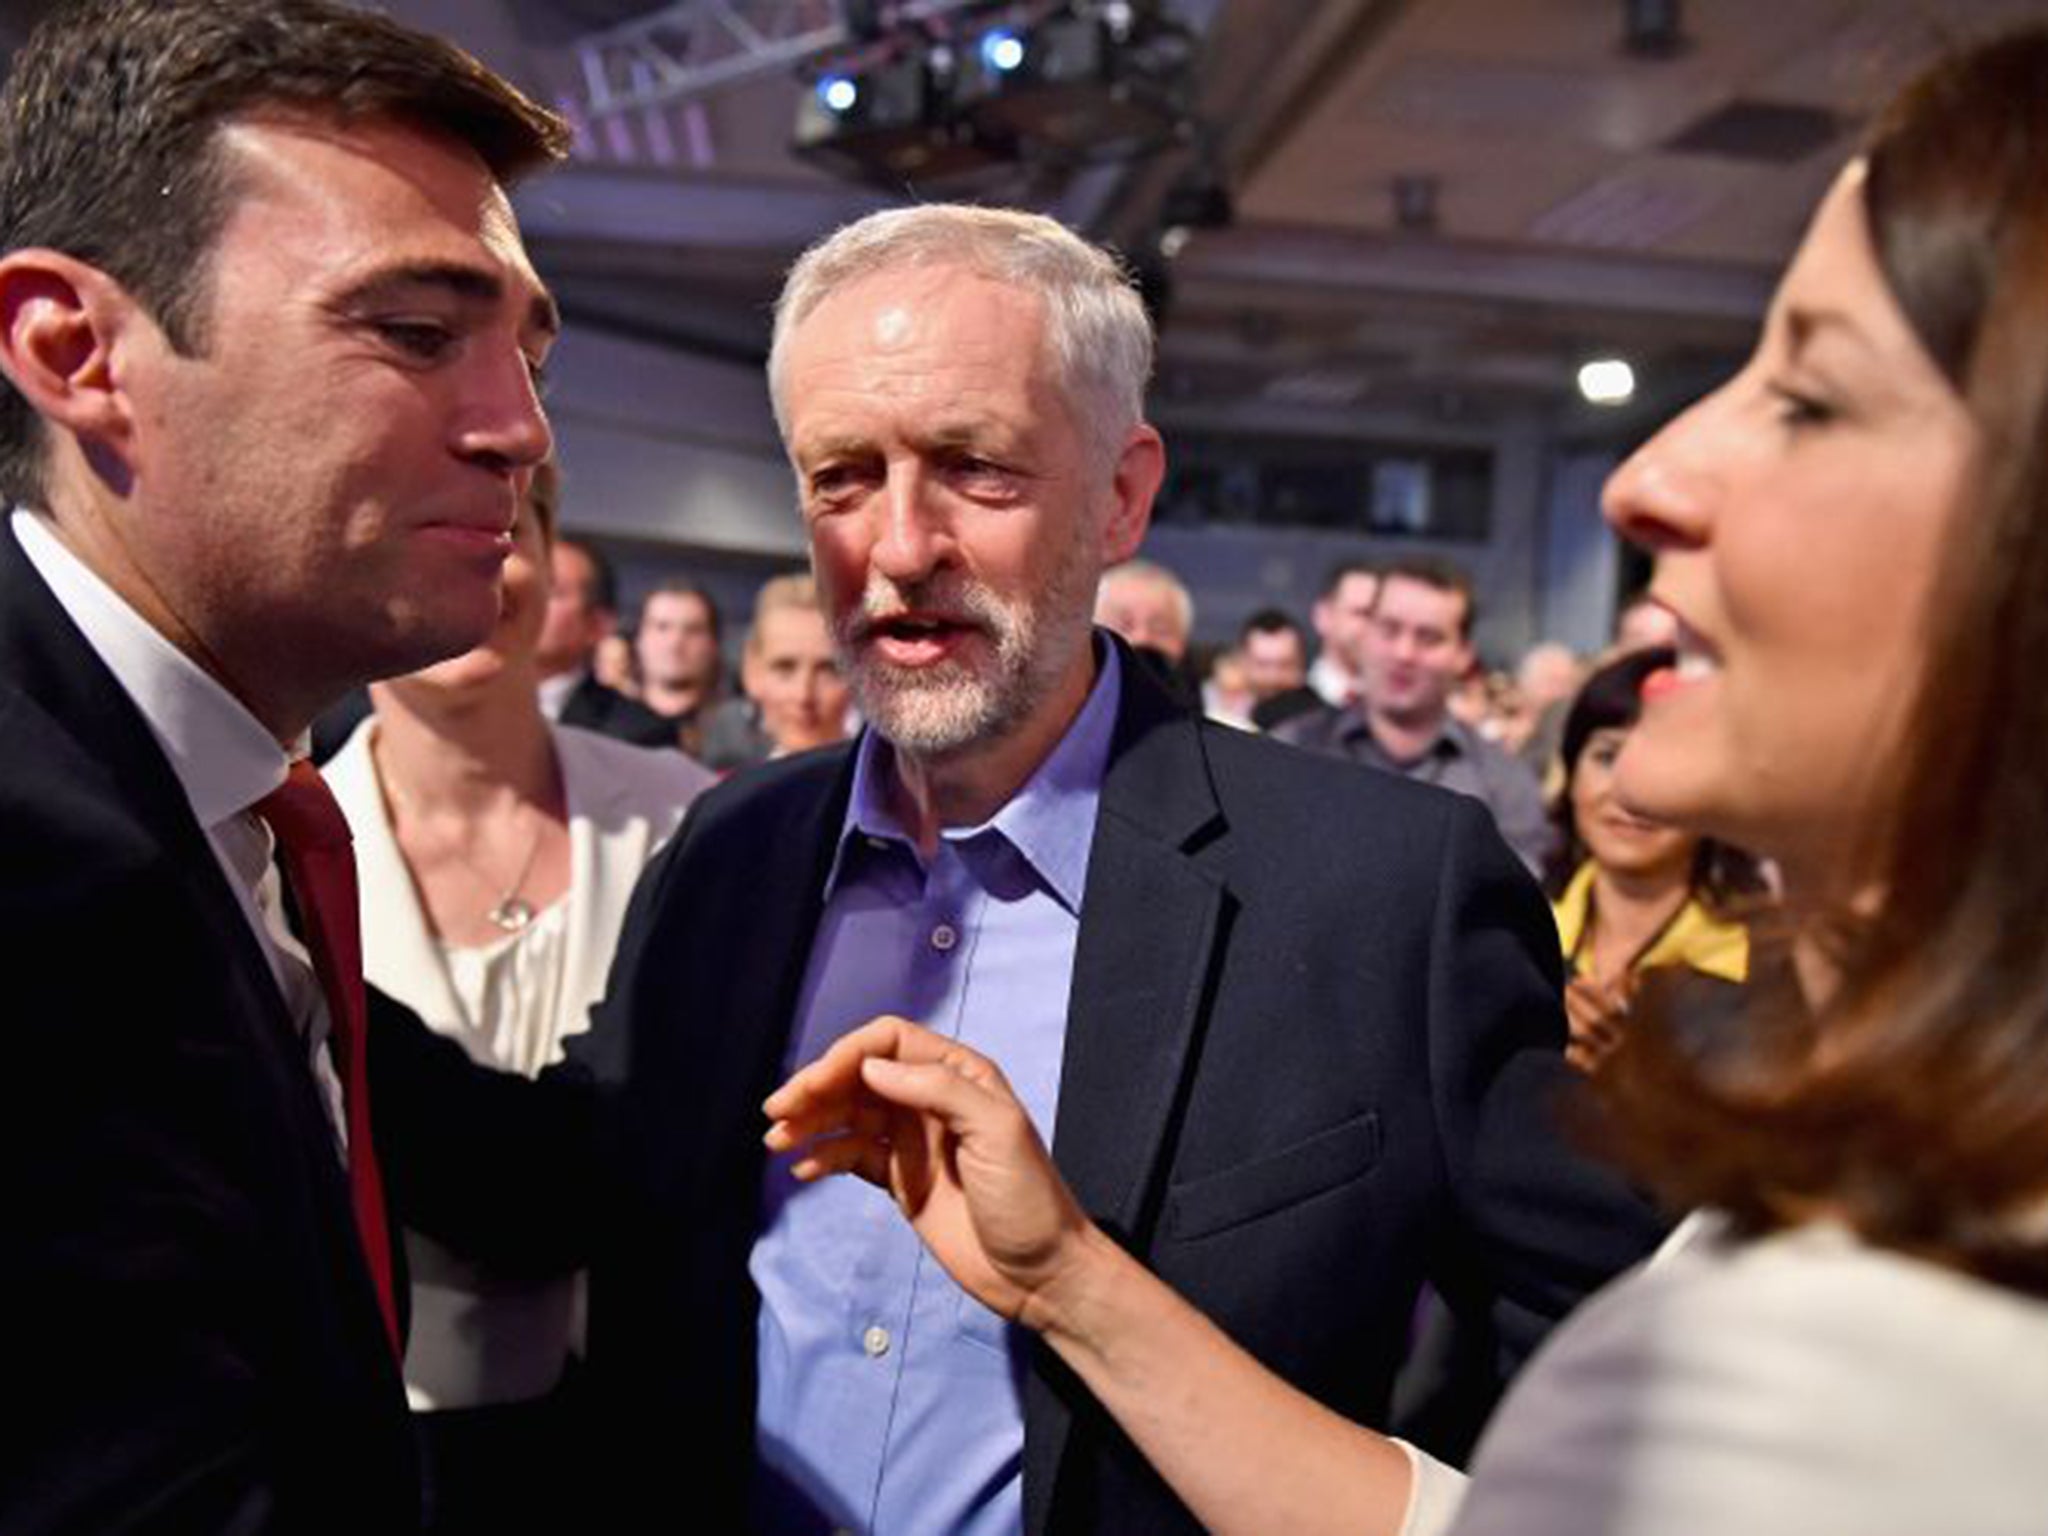 Andy Burnham, left, is the only one of Mr Corbyn’s fellow candidates who is willing to serve in his shadow cabinet. Liz Kendall, right, has already counted herself out